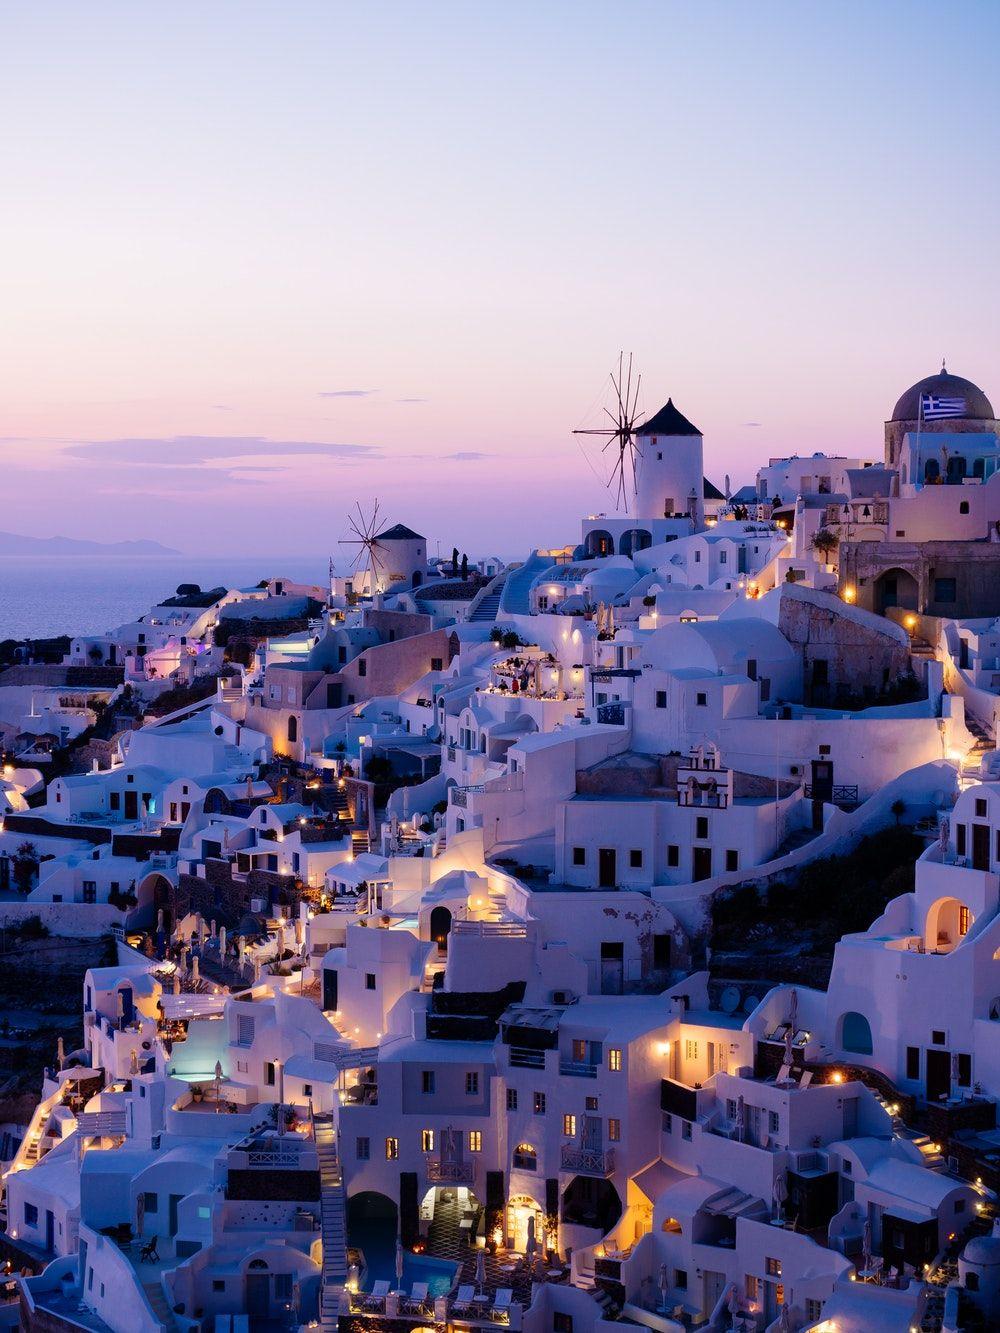 Beautiful Greece Picture. Download Free Image